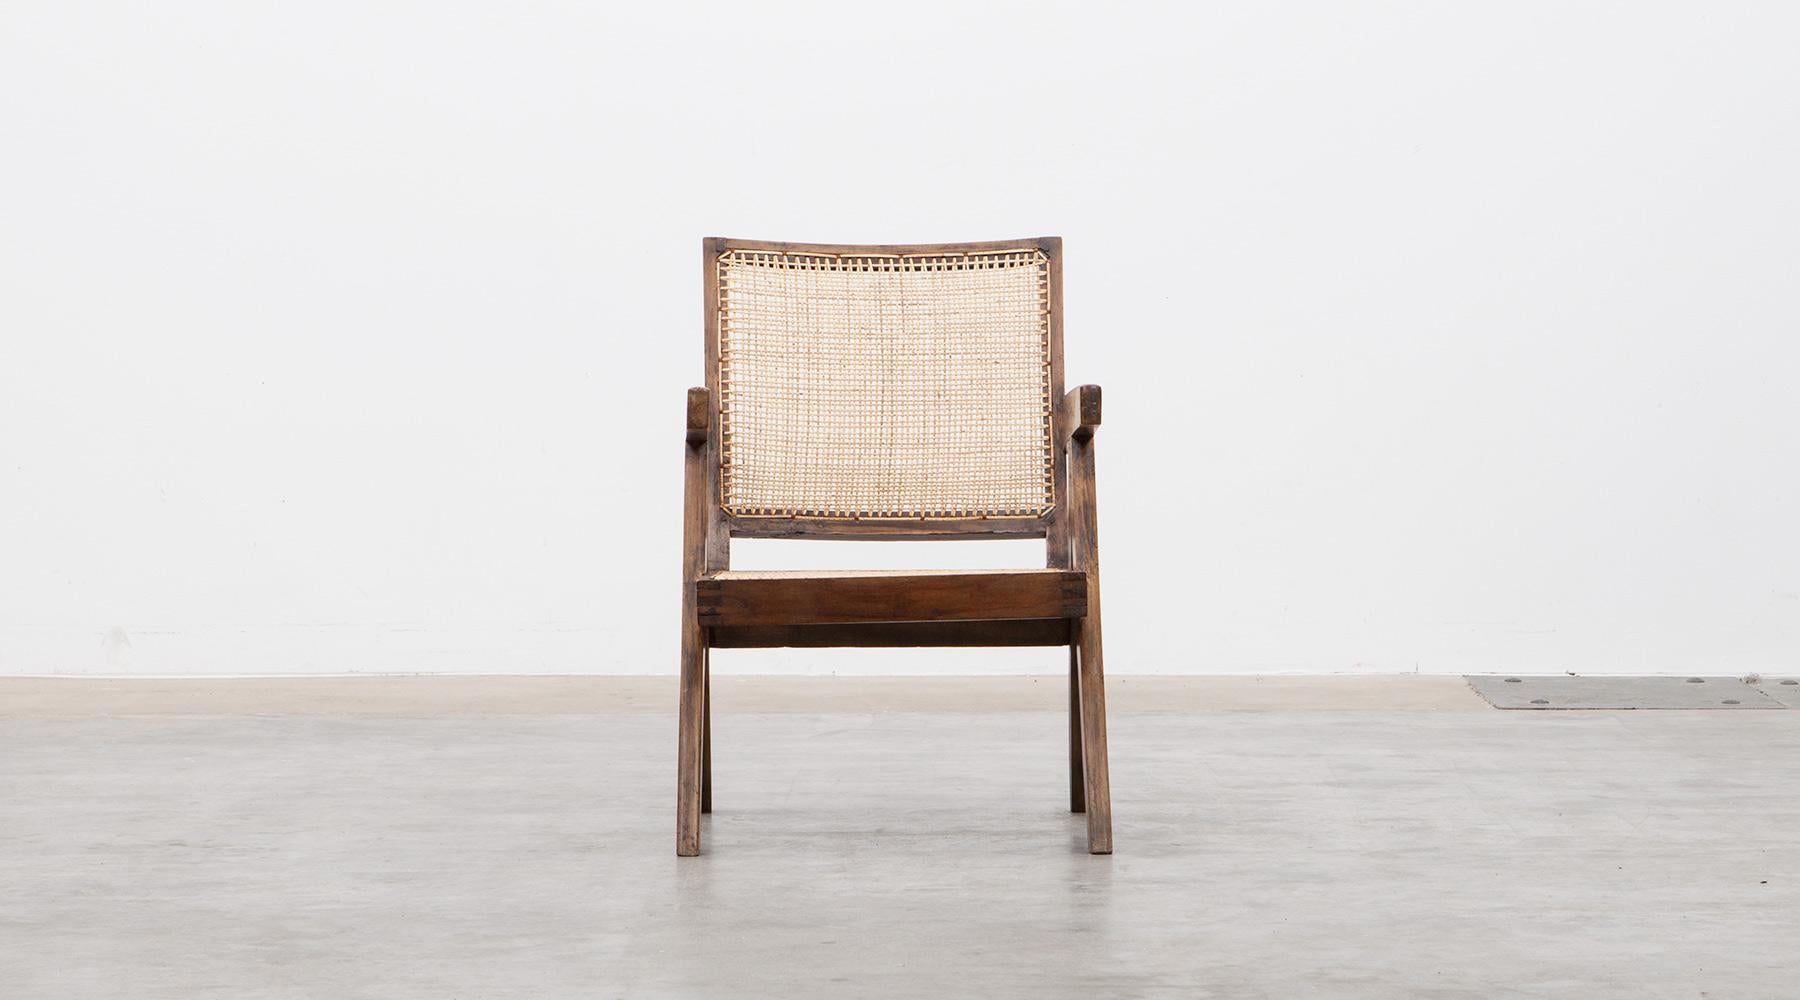 Pair of lounge chairs designed by Pierre Jeanneret in teak, Chandigarh, India, 1955

These original lounge chairs designed by Pierre Jeanneret in teak with woven cane on the seat and curved backrest appears in beautiful patina. Considering India